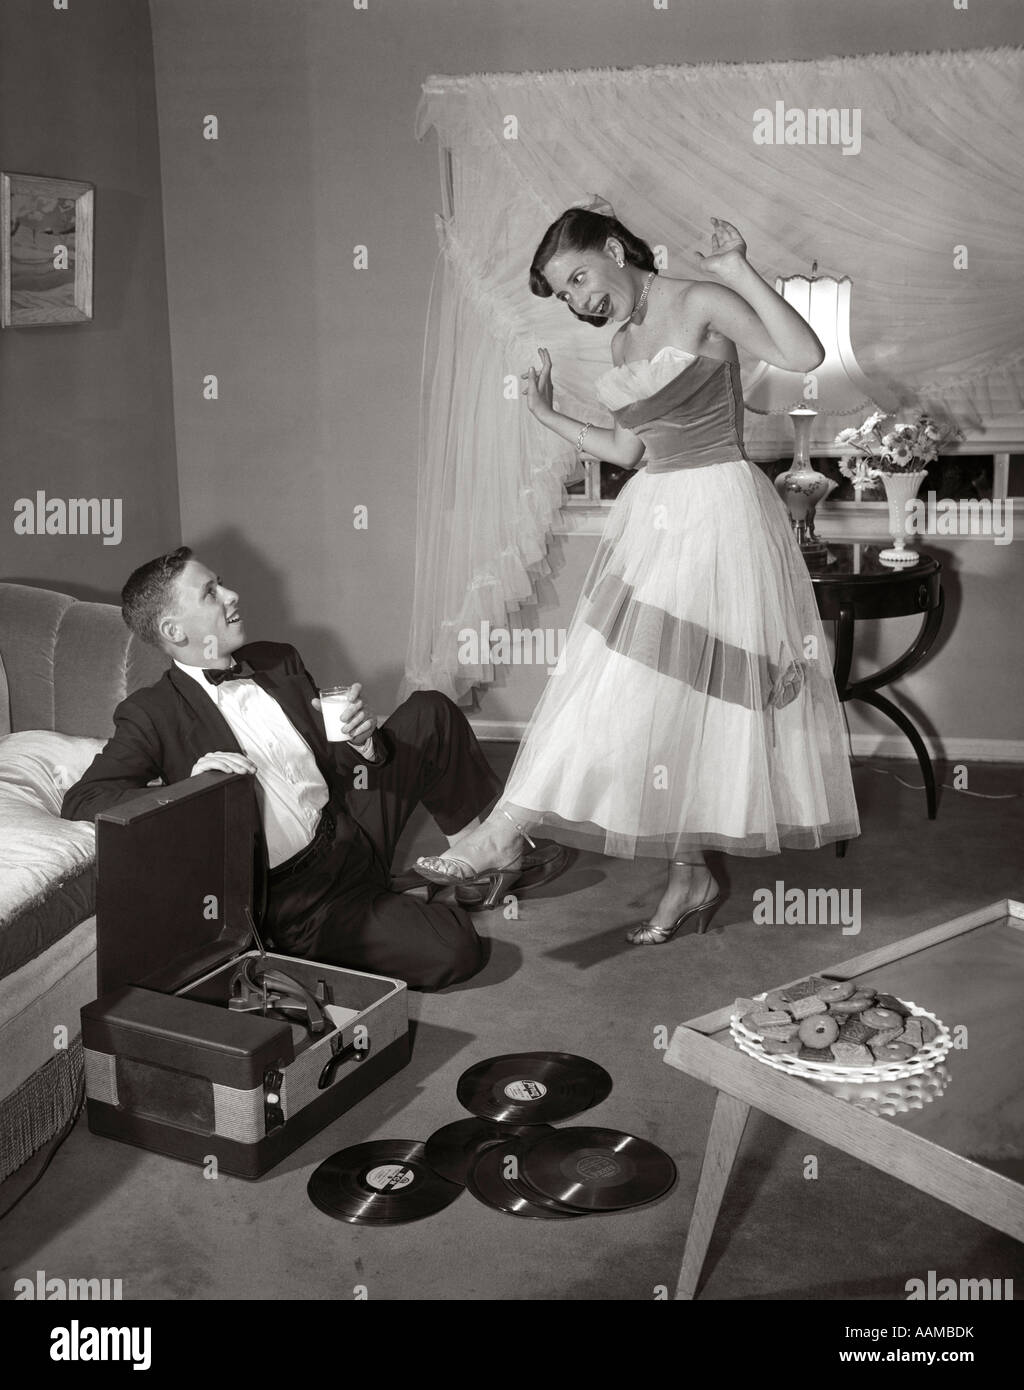 1950s 1960s TEEN COUPLE IN LIVING ROOM IN PROM DRESS & TUXEDO GUY SITTING ON FLOOR & GIRL DANCING TO MUSIC FROM A RECORD PLAYER Stock Photo